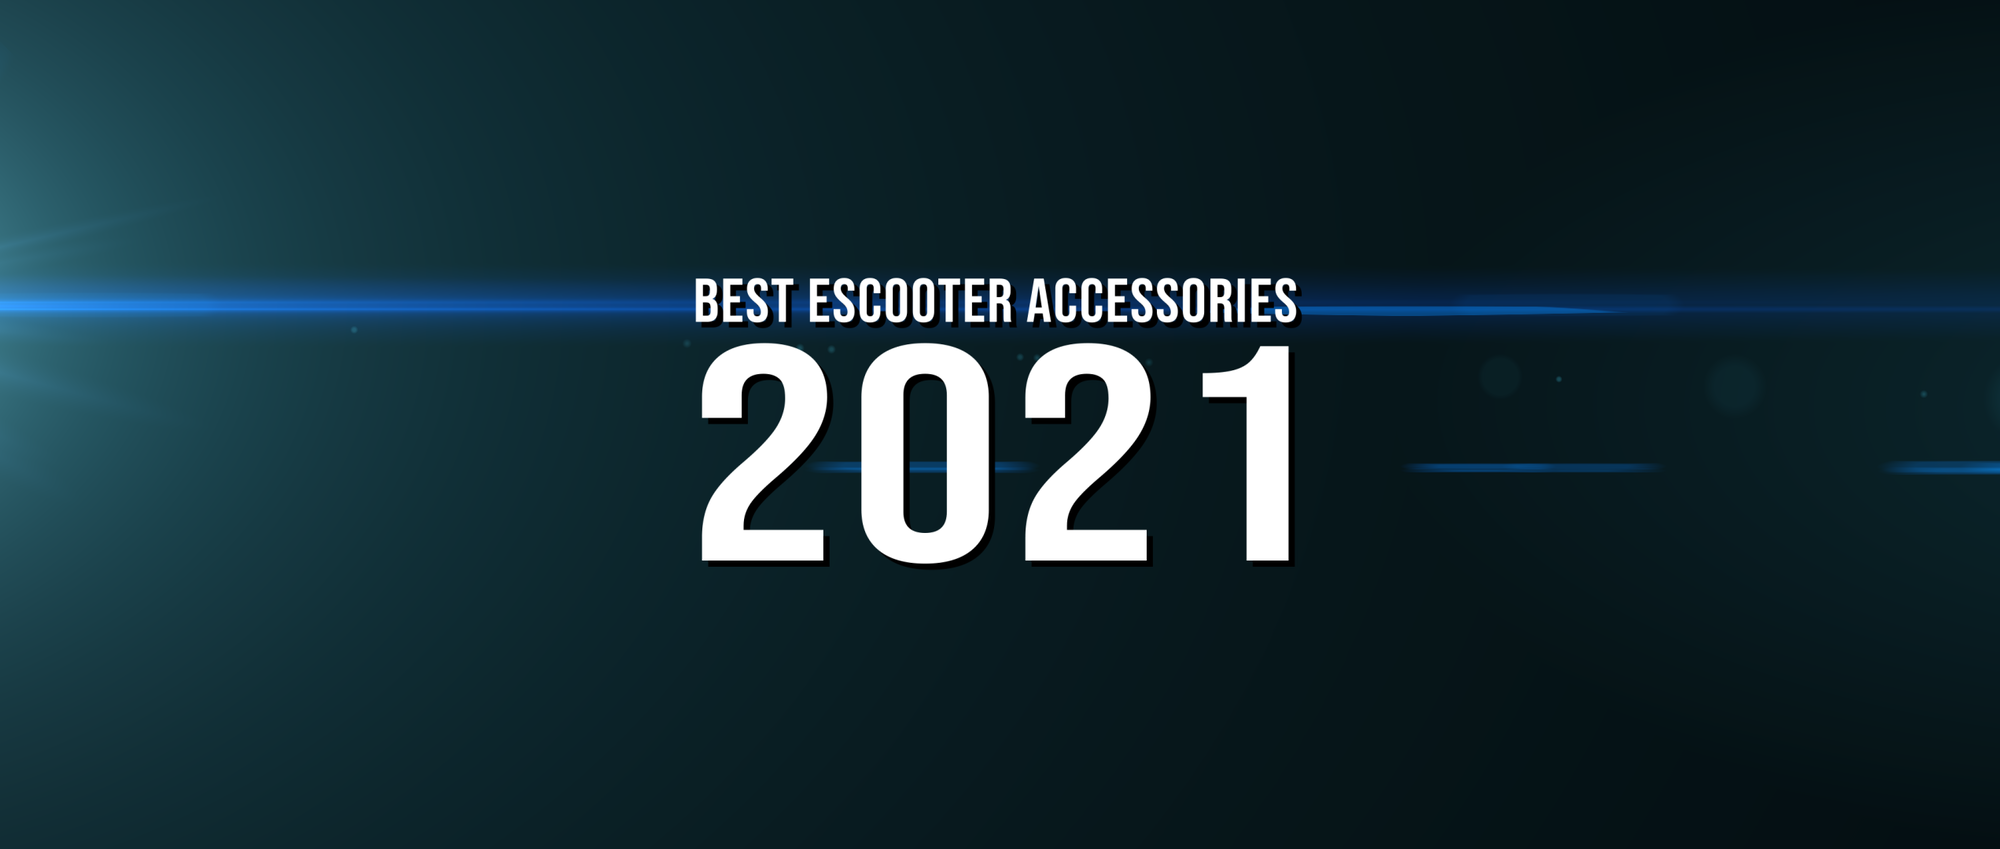 Top 5 Essential Escooter Accessories for 2021